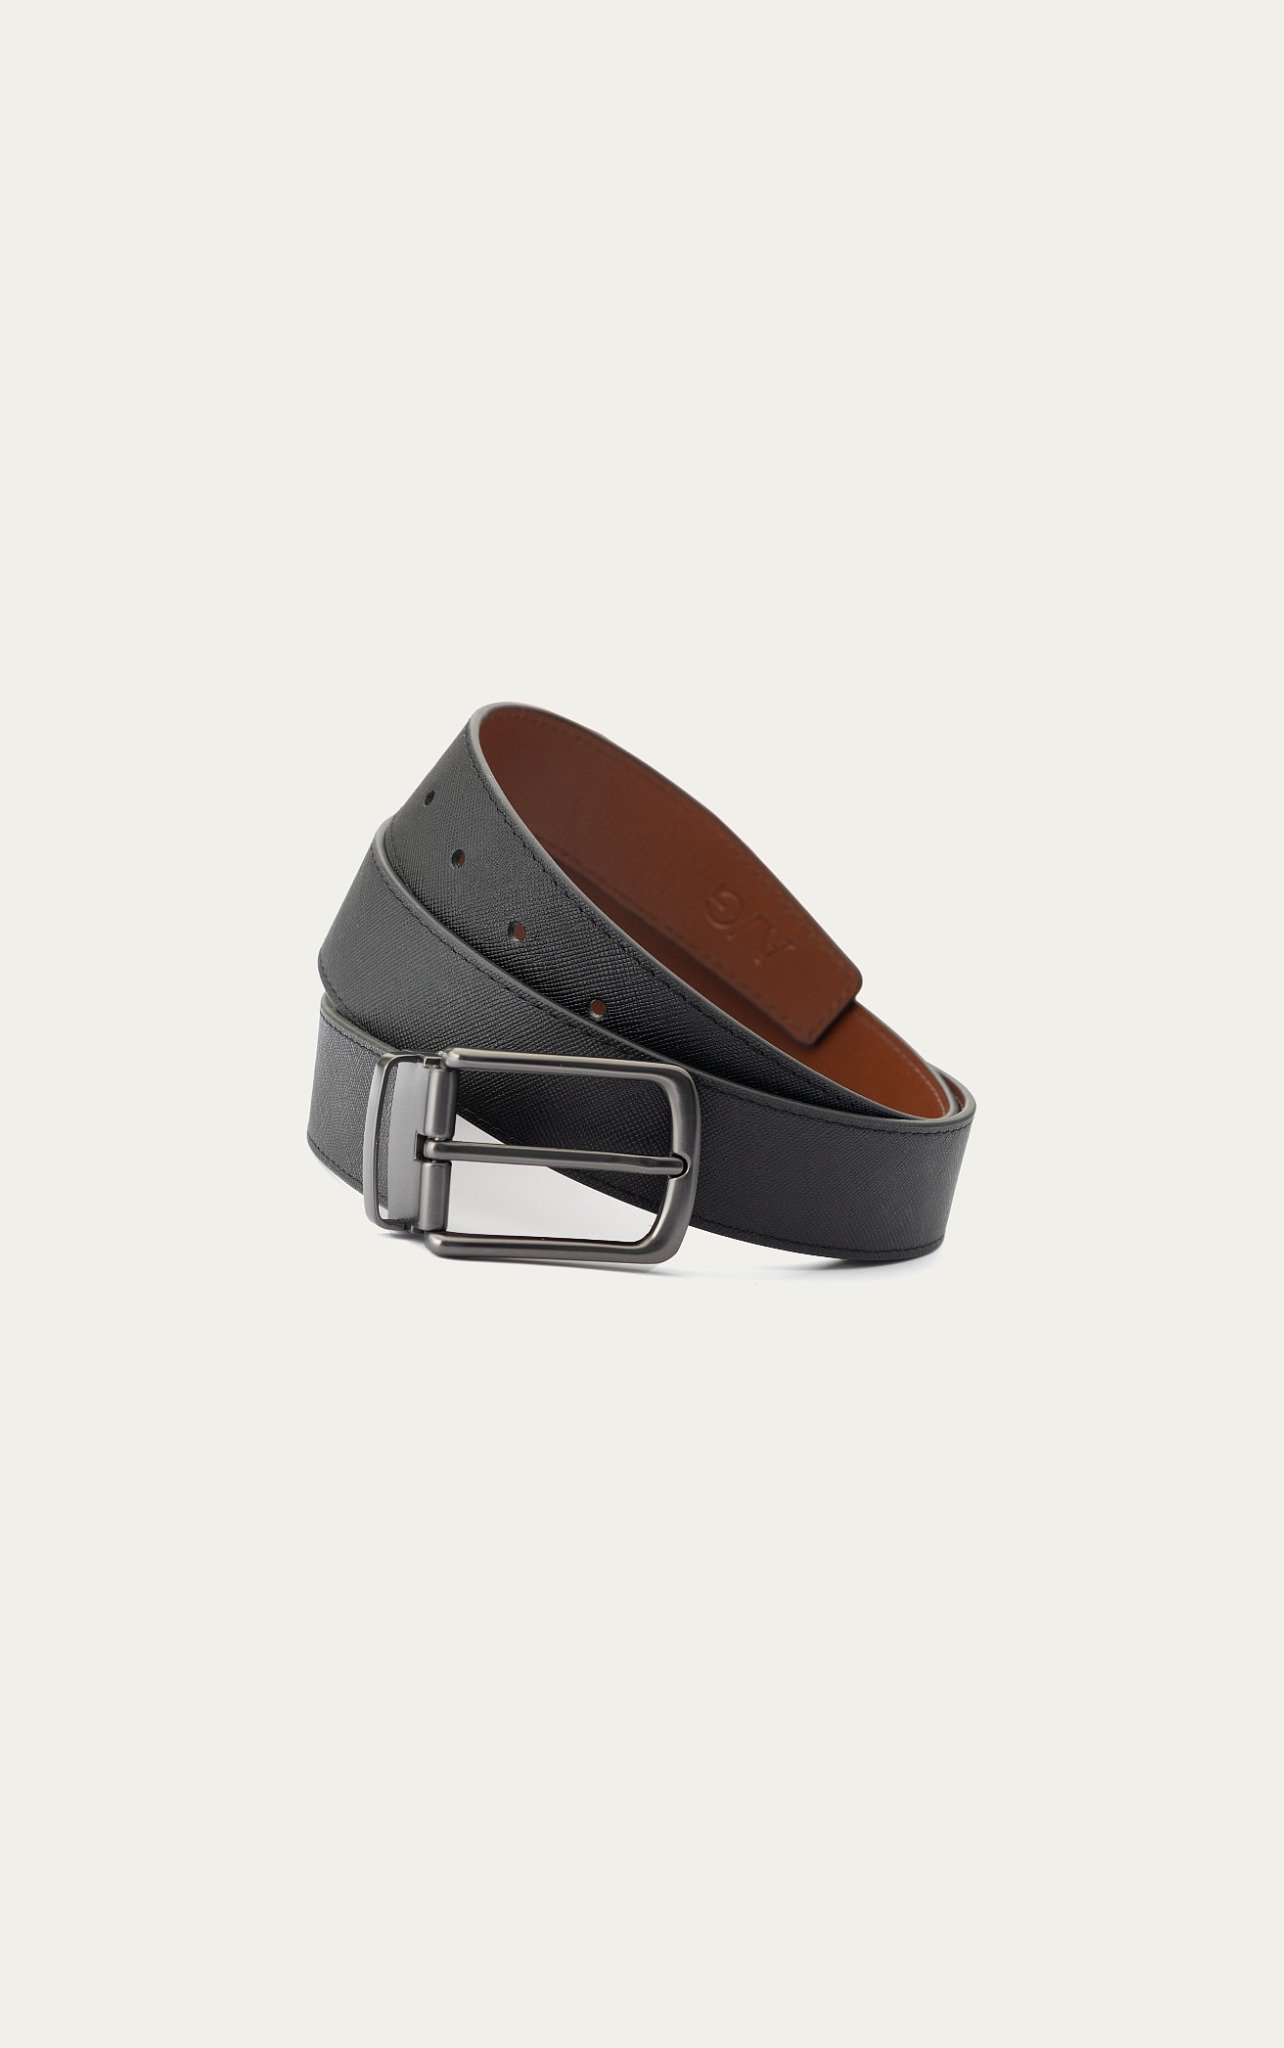 AG LEATHER BELTS - SQUARE HEAD METALLIC SILVER